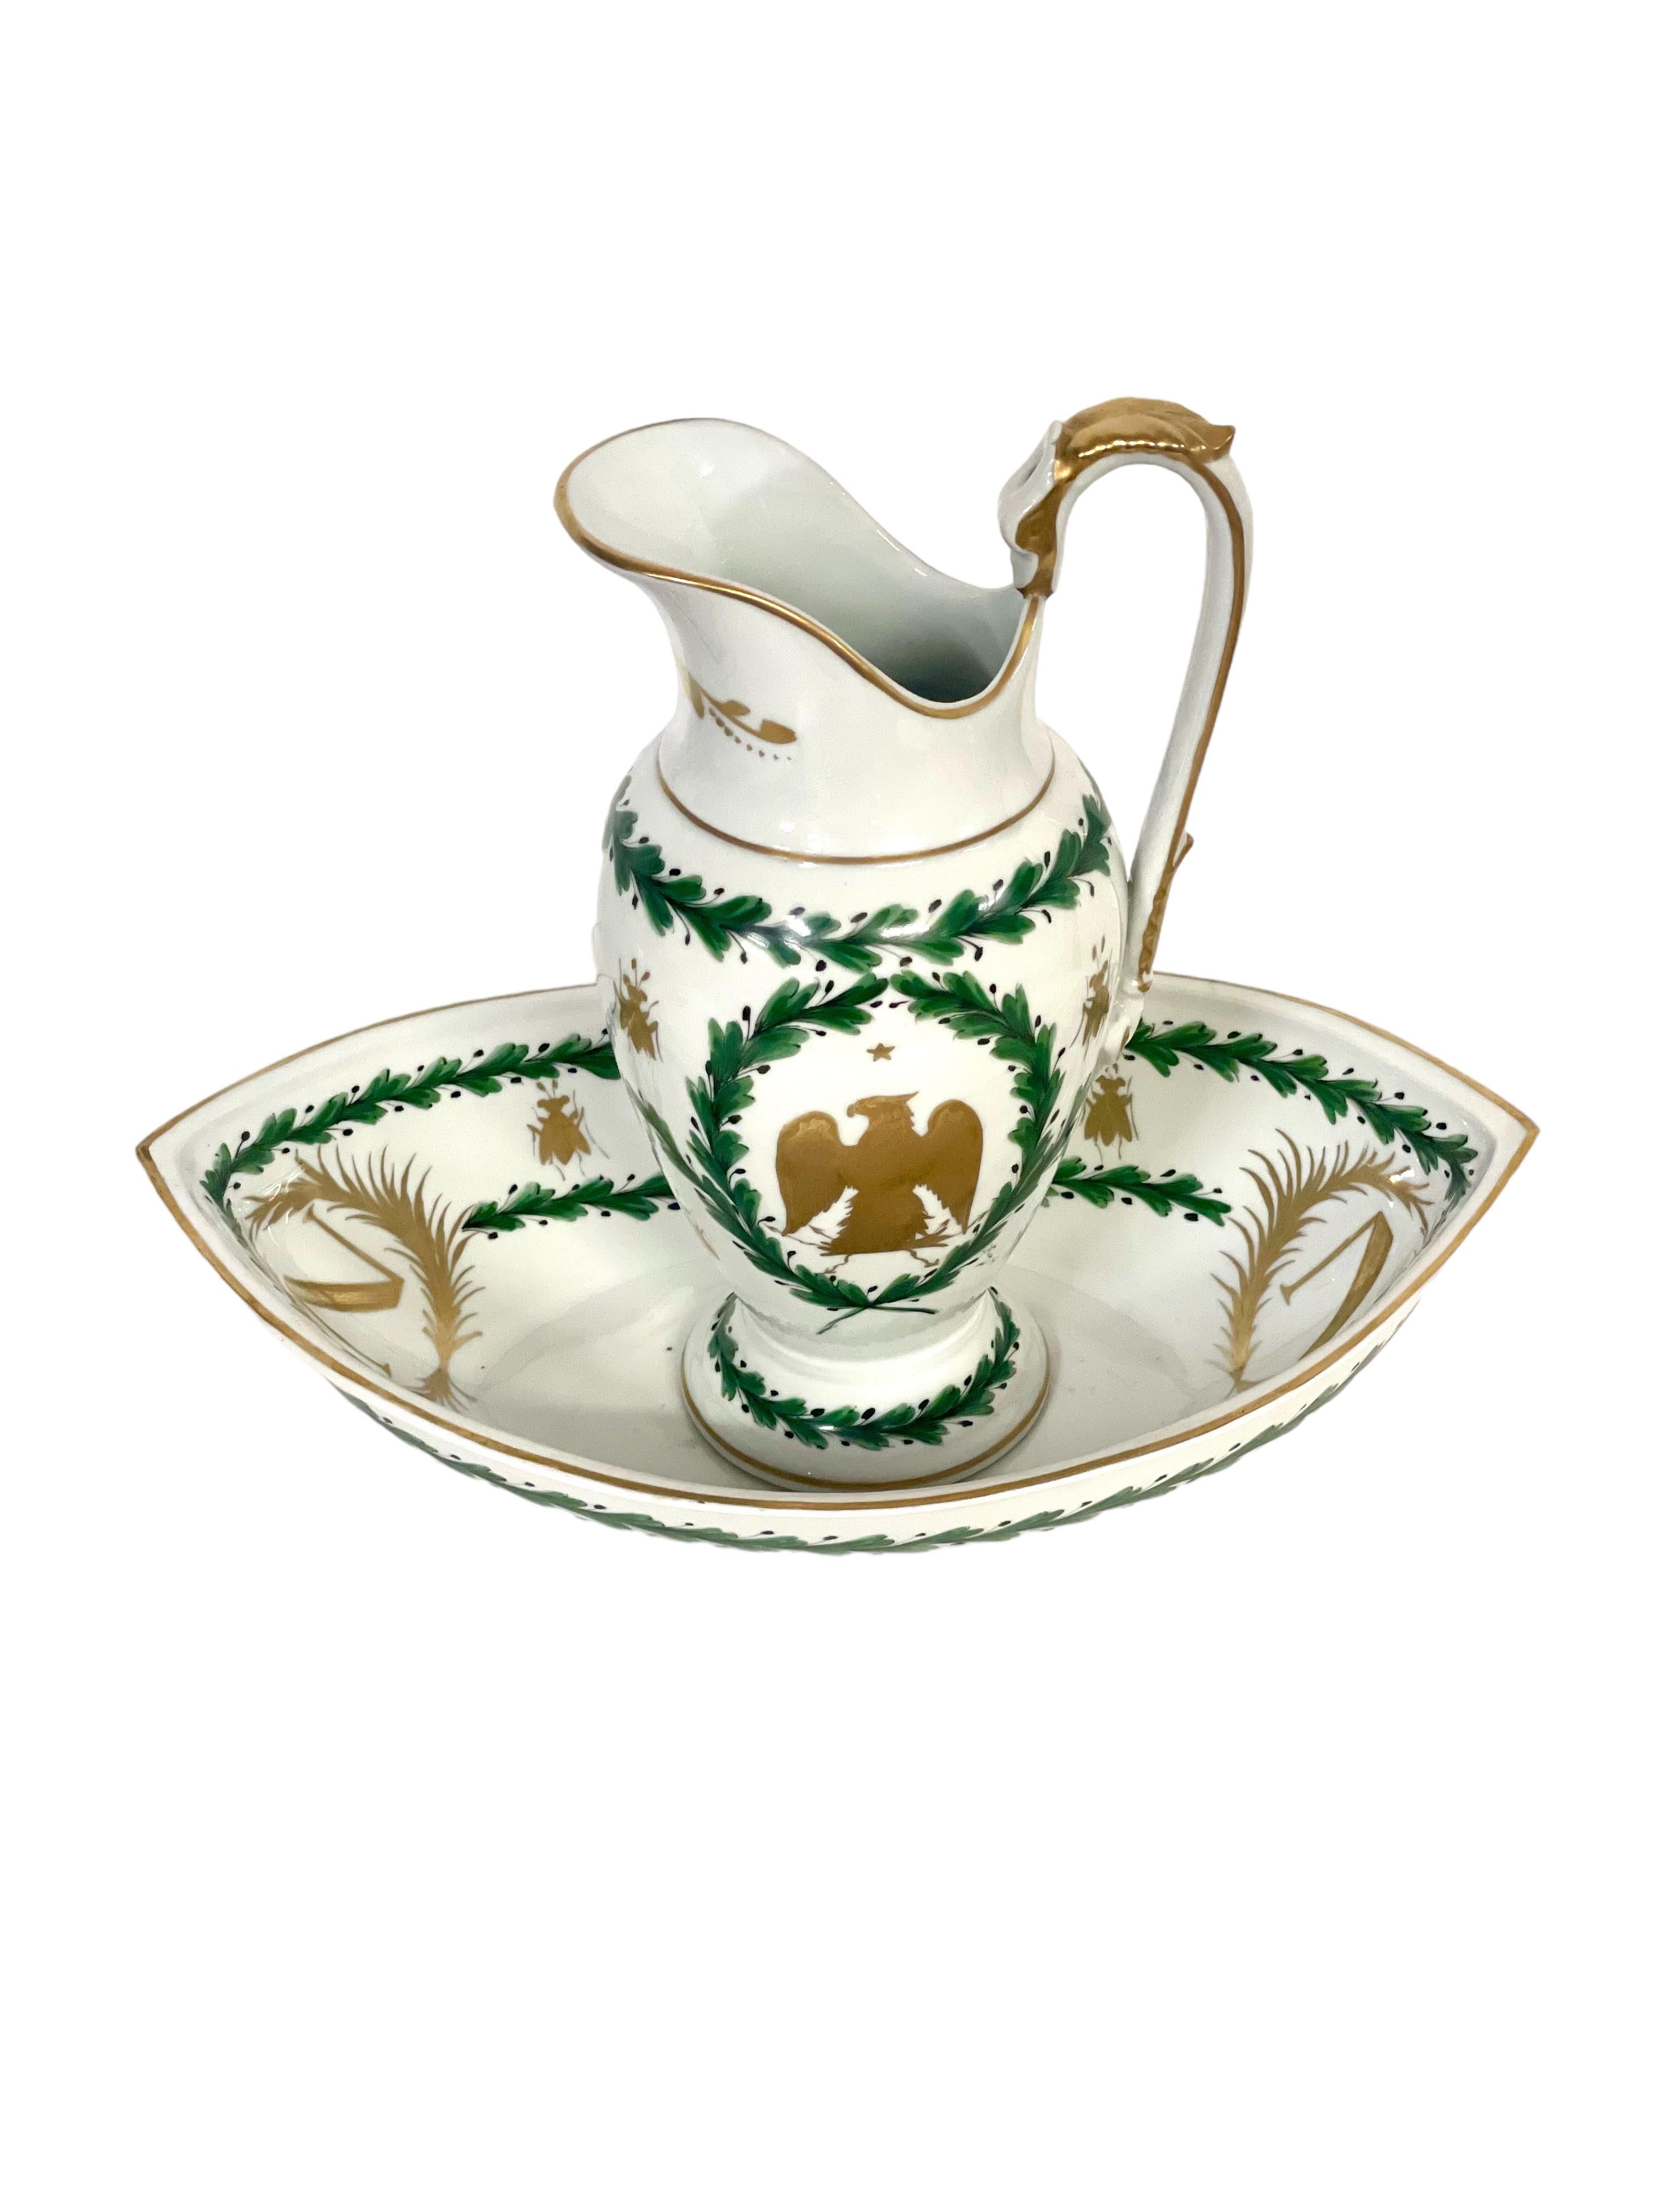 French Empire Period Paris Porcelain Basin and Pitcher with Napoleonic Emblems For Sale 10